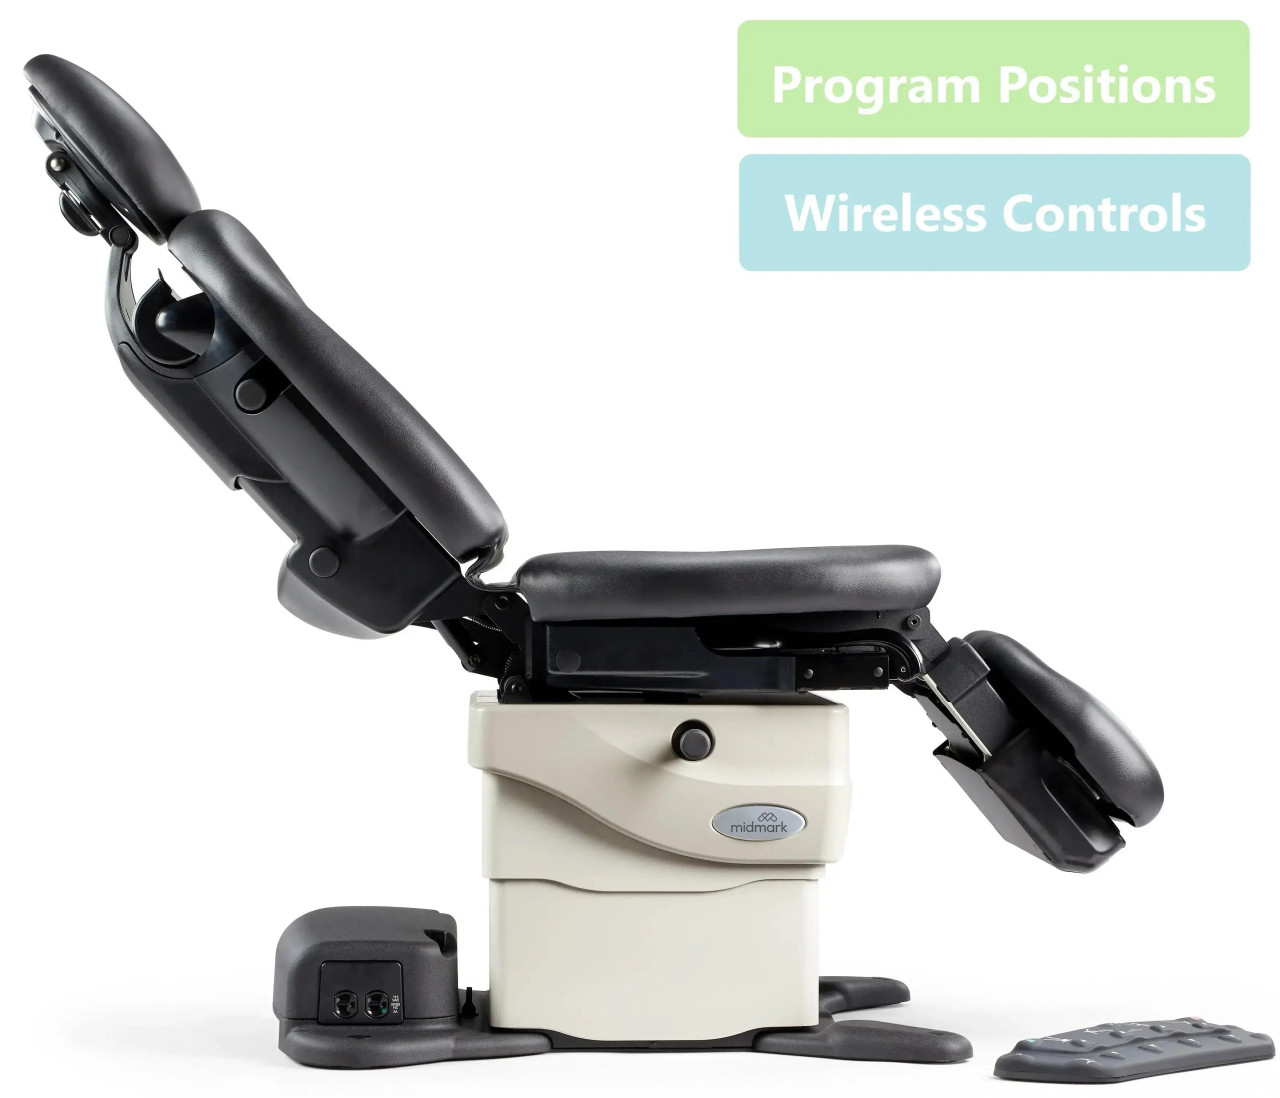 The Evolution of Doctor Chairs: Comfort, Ergonomics, and Patient Care -  MediKart HealthCare Systems - India's Trustworthy Online Store